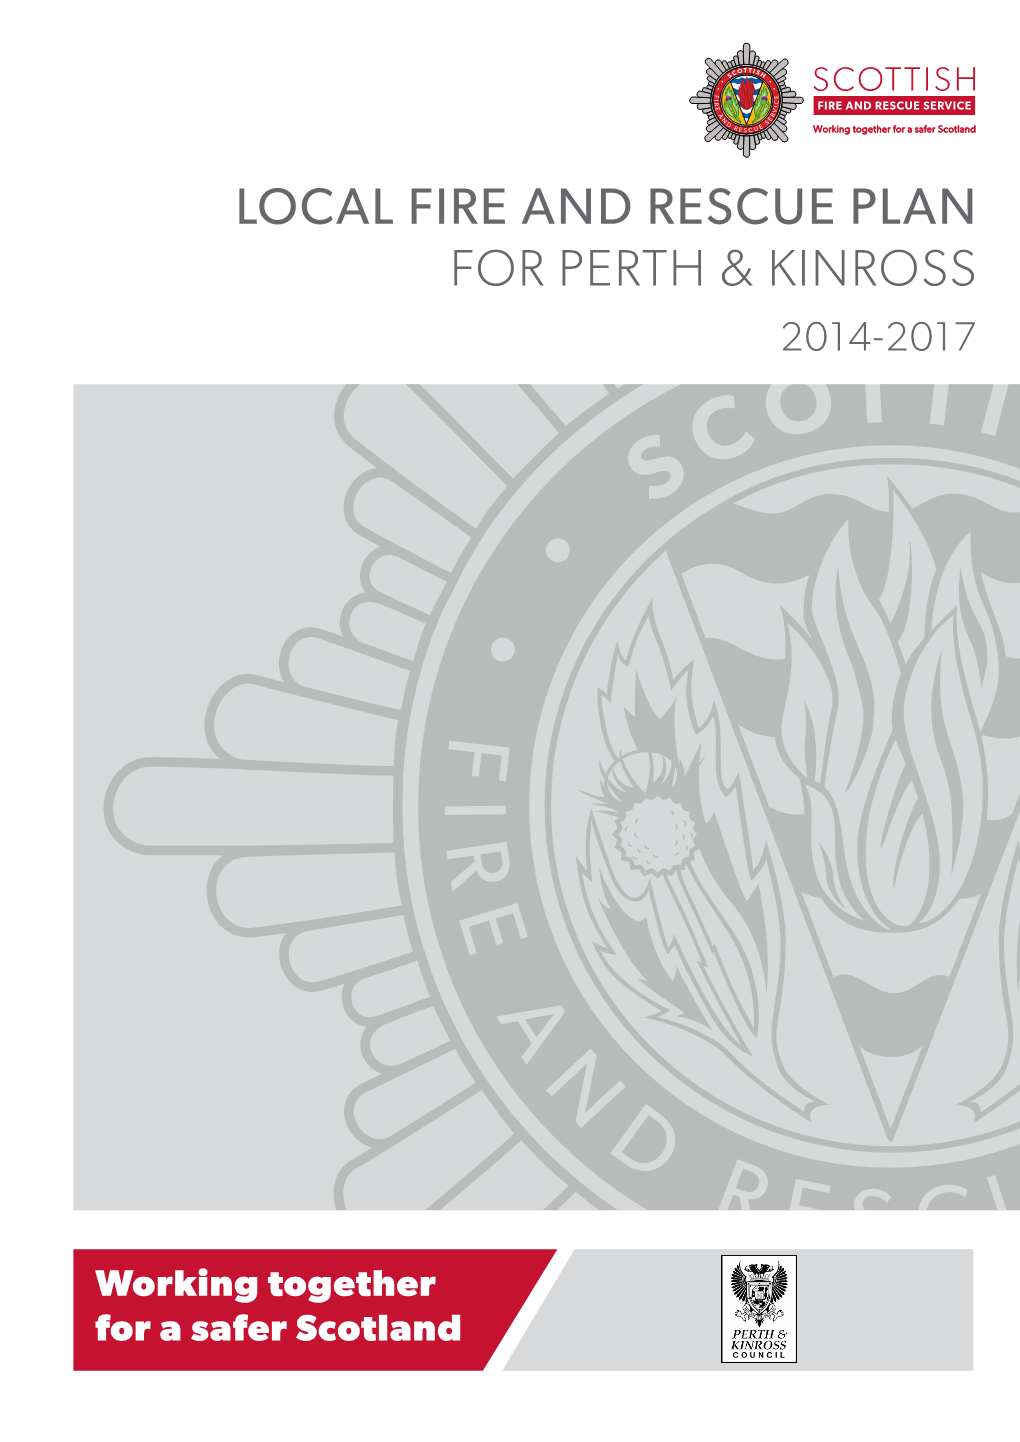 Local Fire and Rescue Plan for Perth & Kinross